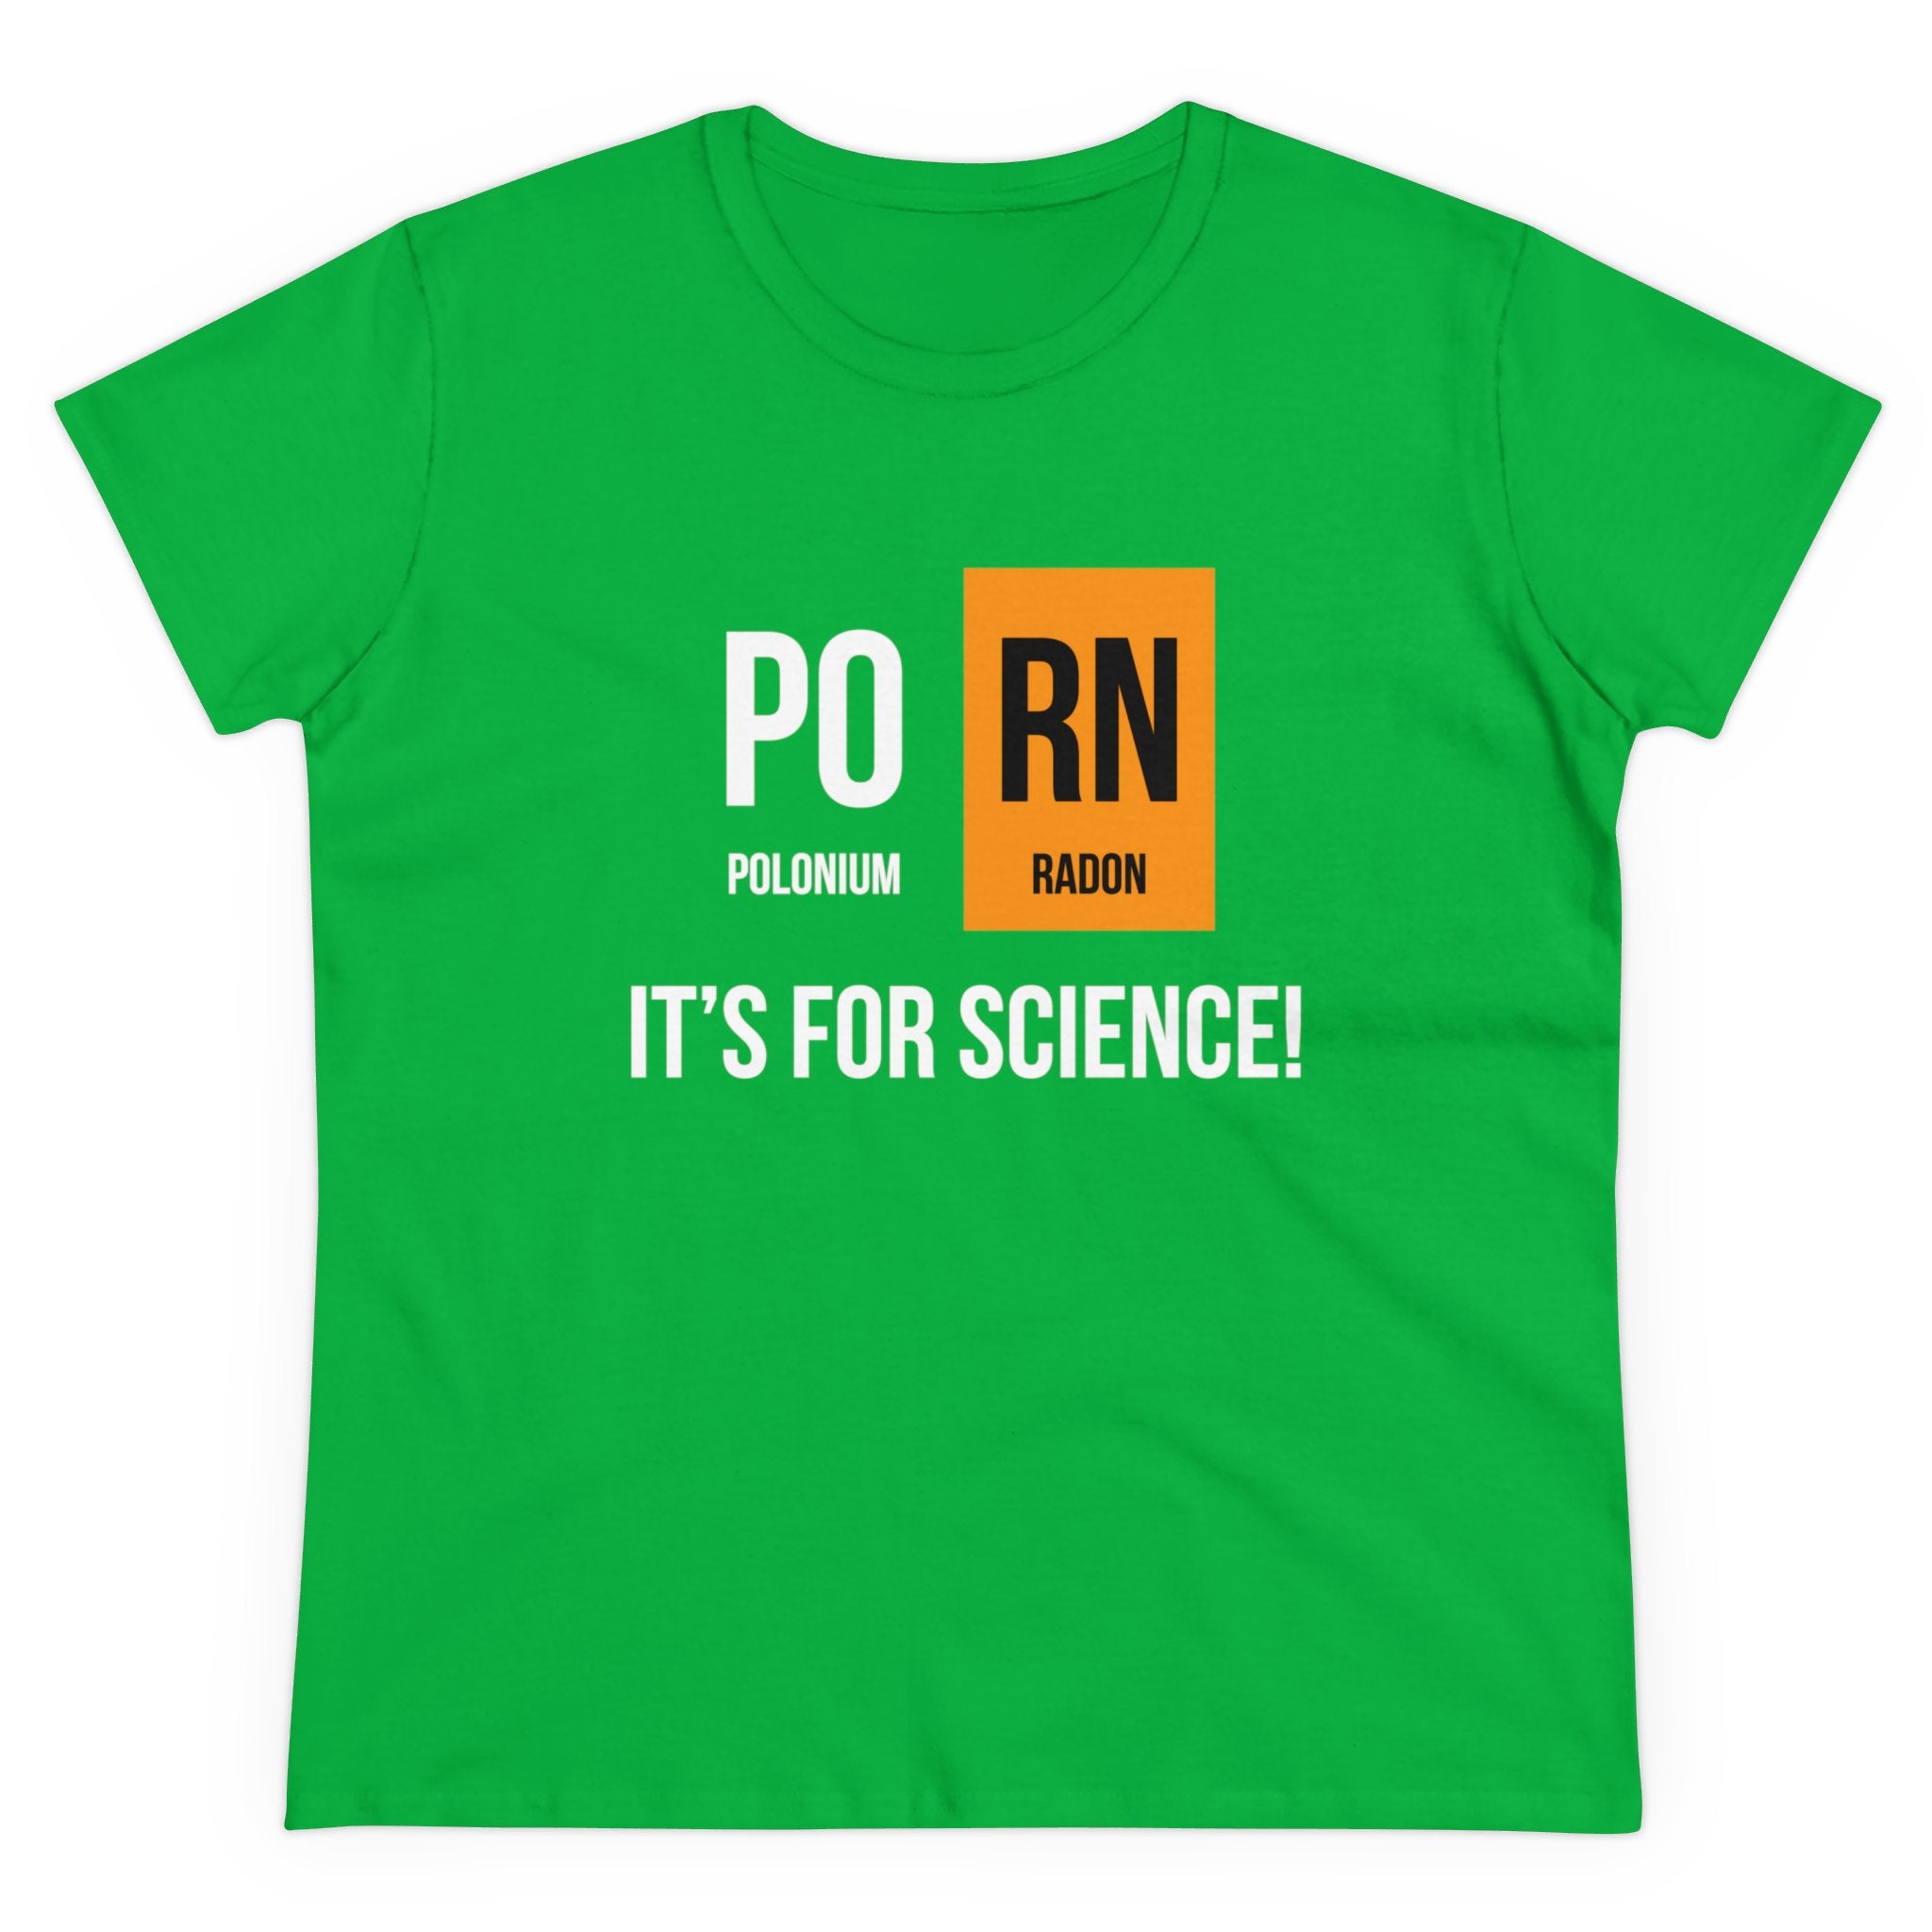 PO-RN - Women's Tee in soft cotton, featuring a PO-RN design with elements Polonium (Po) and Radon (Rn), and text below that reads, "It's for Science!